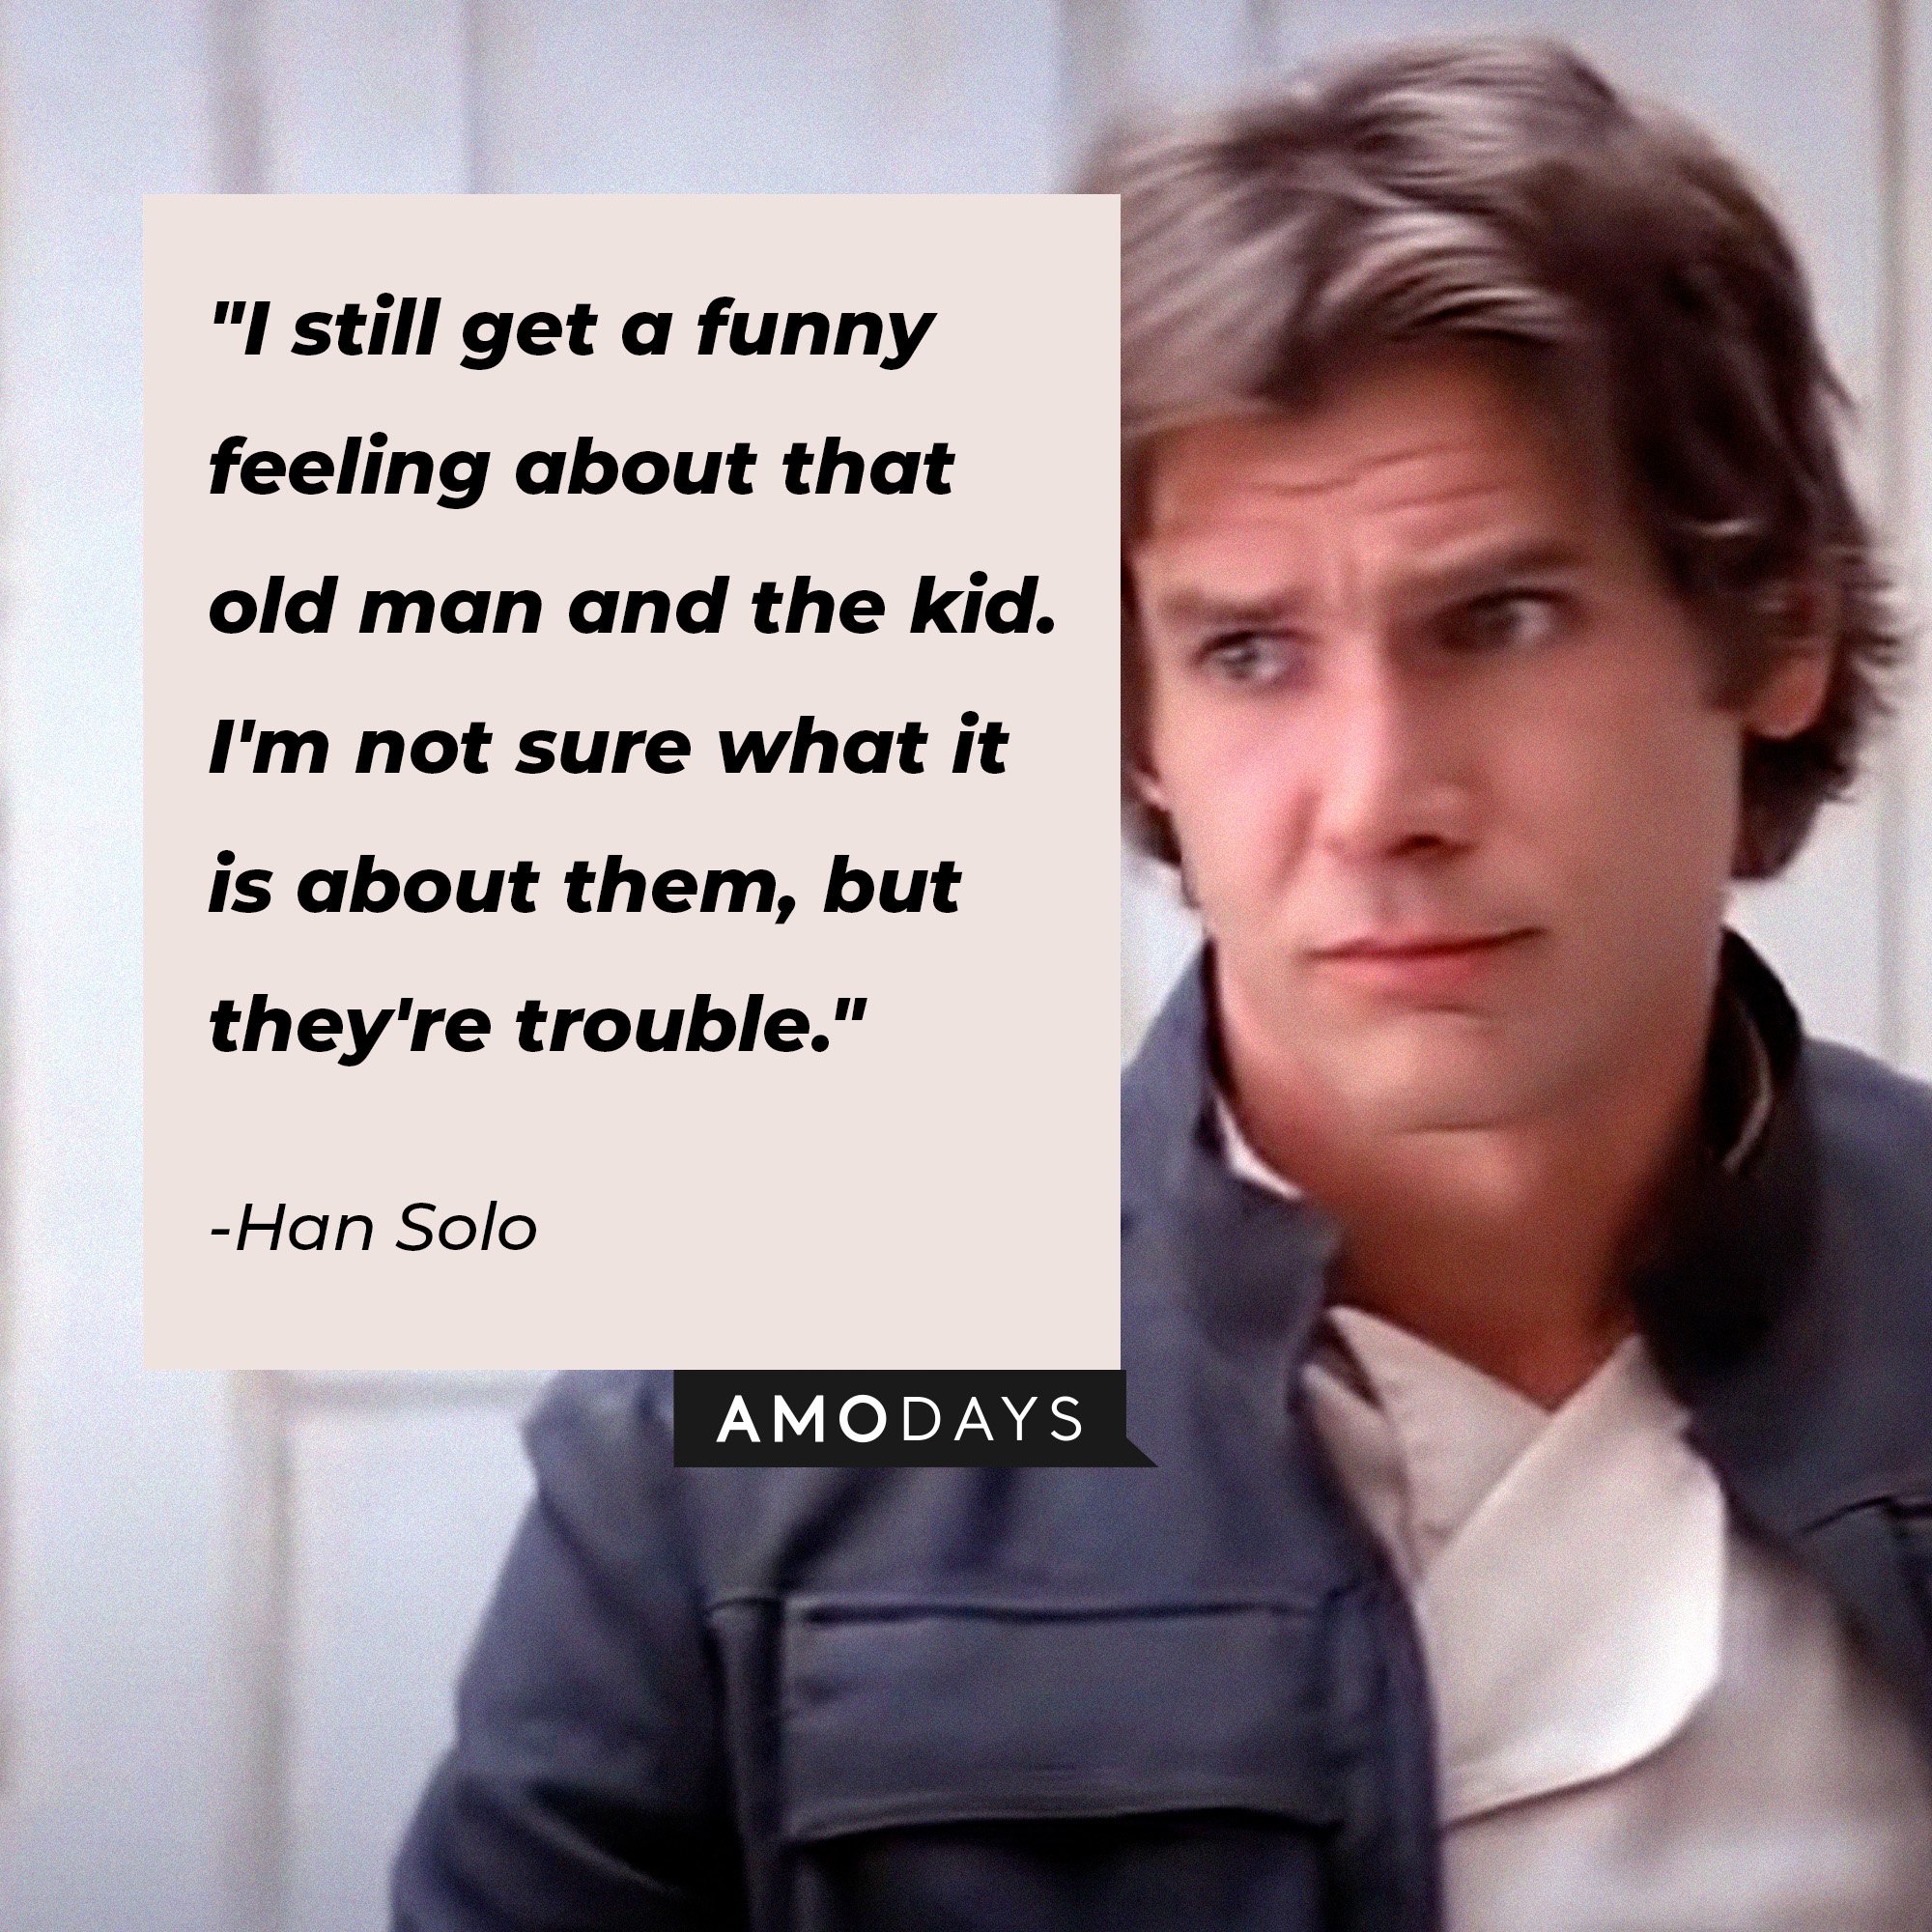 Han Solo’s quote: "I still get a funny feeling about that old man and the kid. I'm not sure what it is about them, but they're trouble." | Image: AmoDays